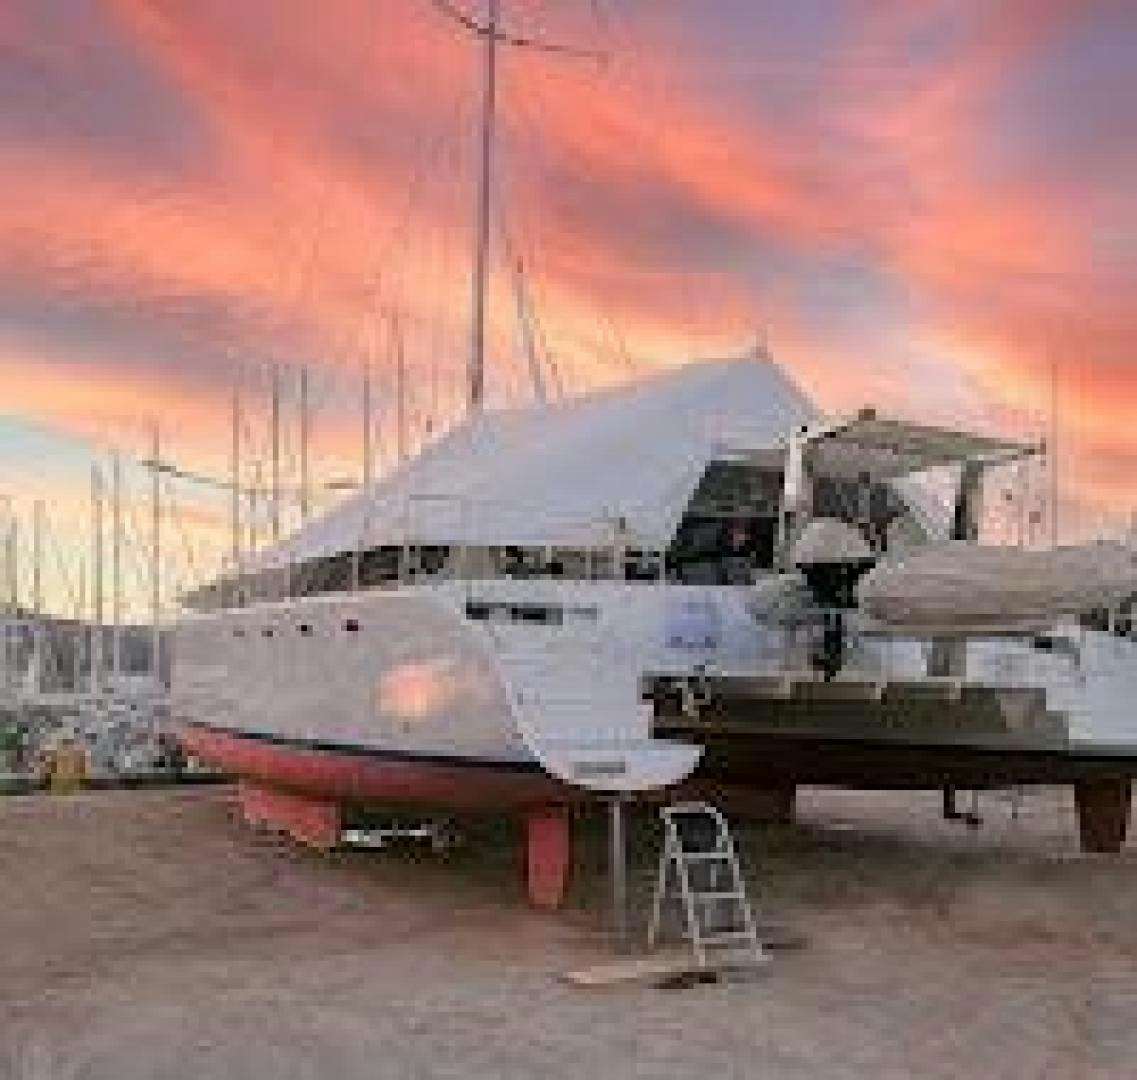 Friends forever
Yacht for Sale